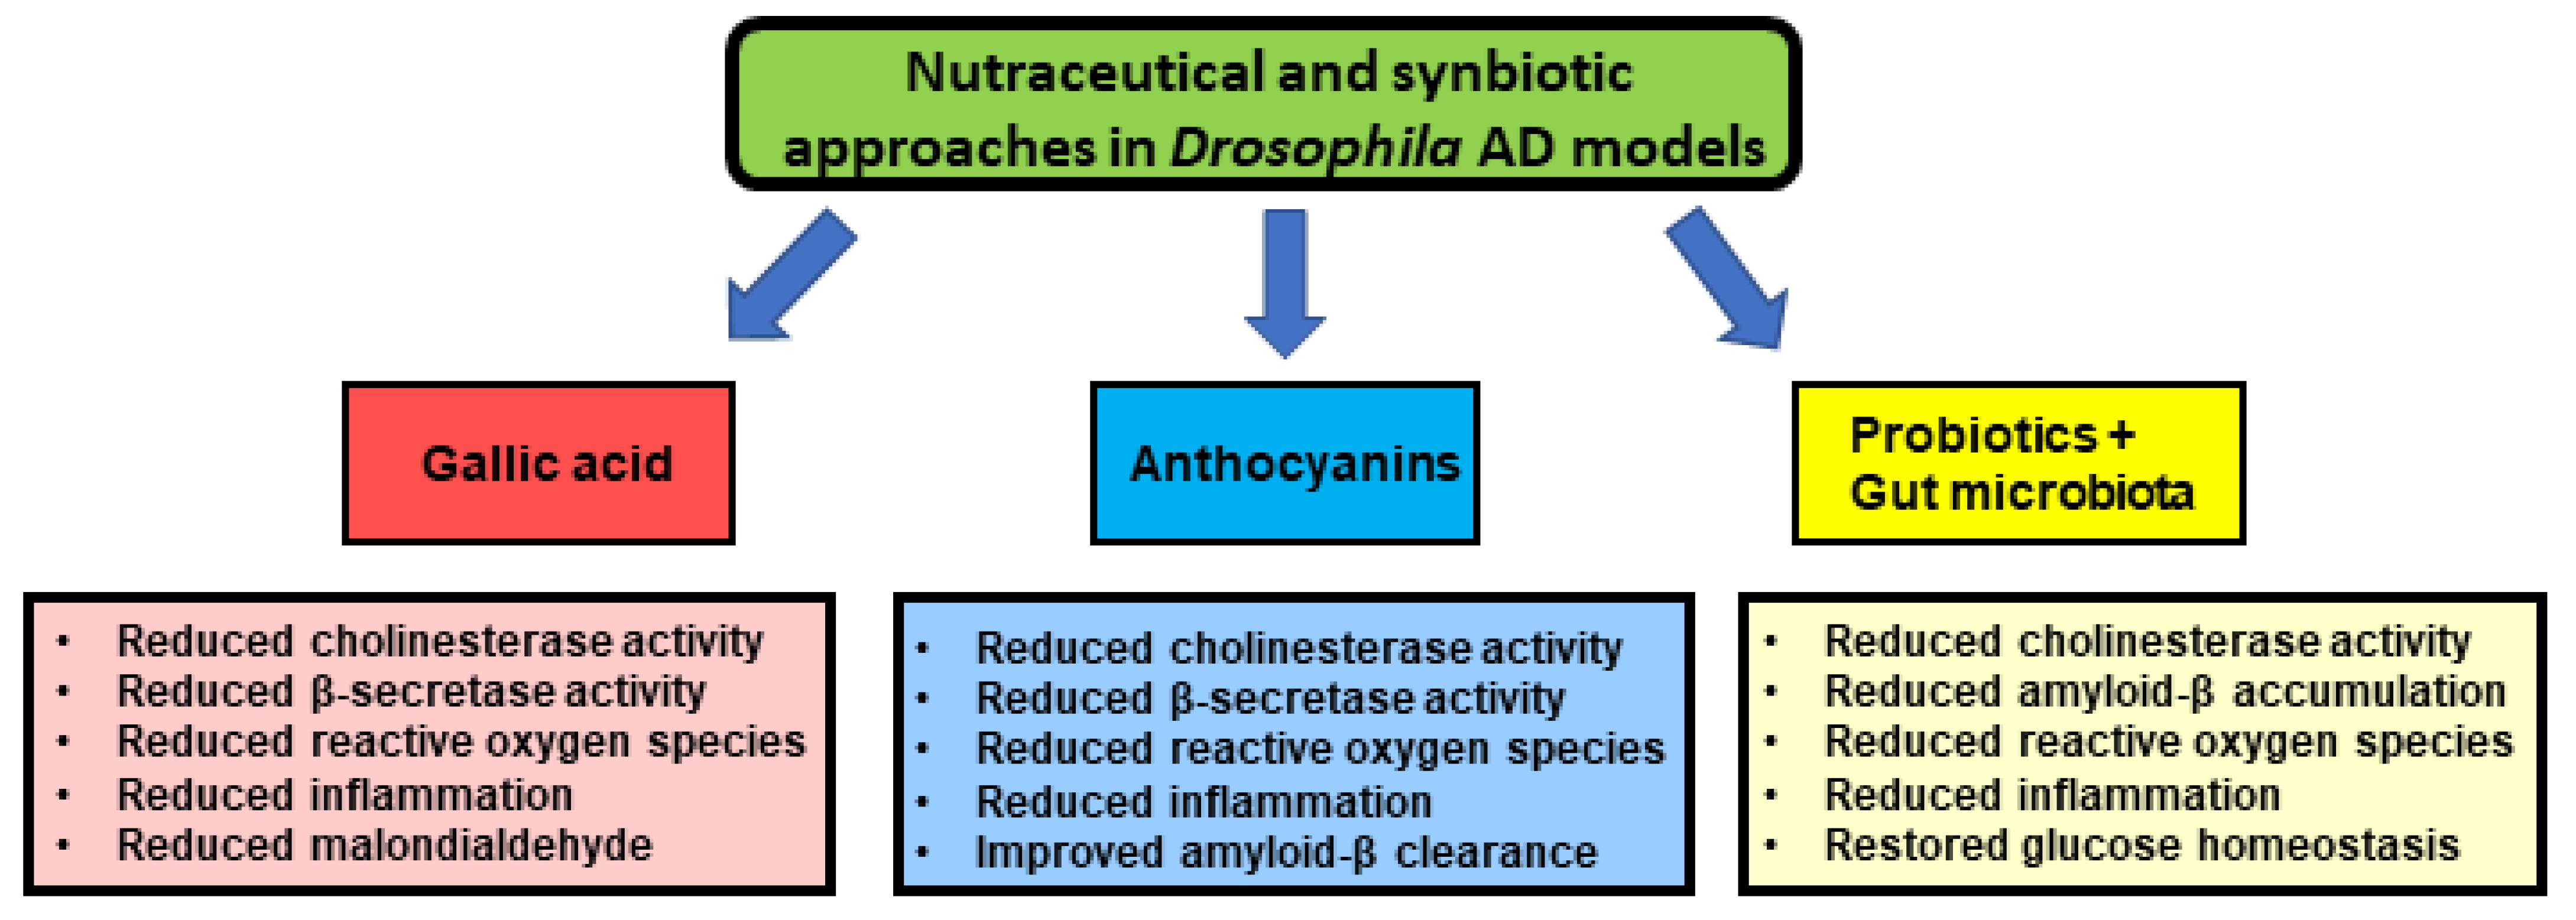 IJMS | Free Full-Text | Nutraceutical and Probiotic Approaches to Examine  Molecular Interactions of the Amyloid Precursor Protein APP in Drosophila  Models of Alzheimer's Disease | HTML